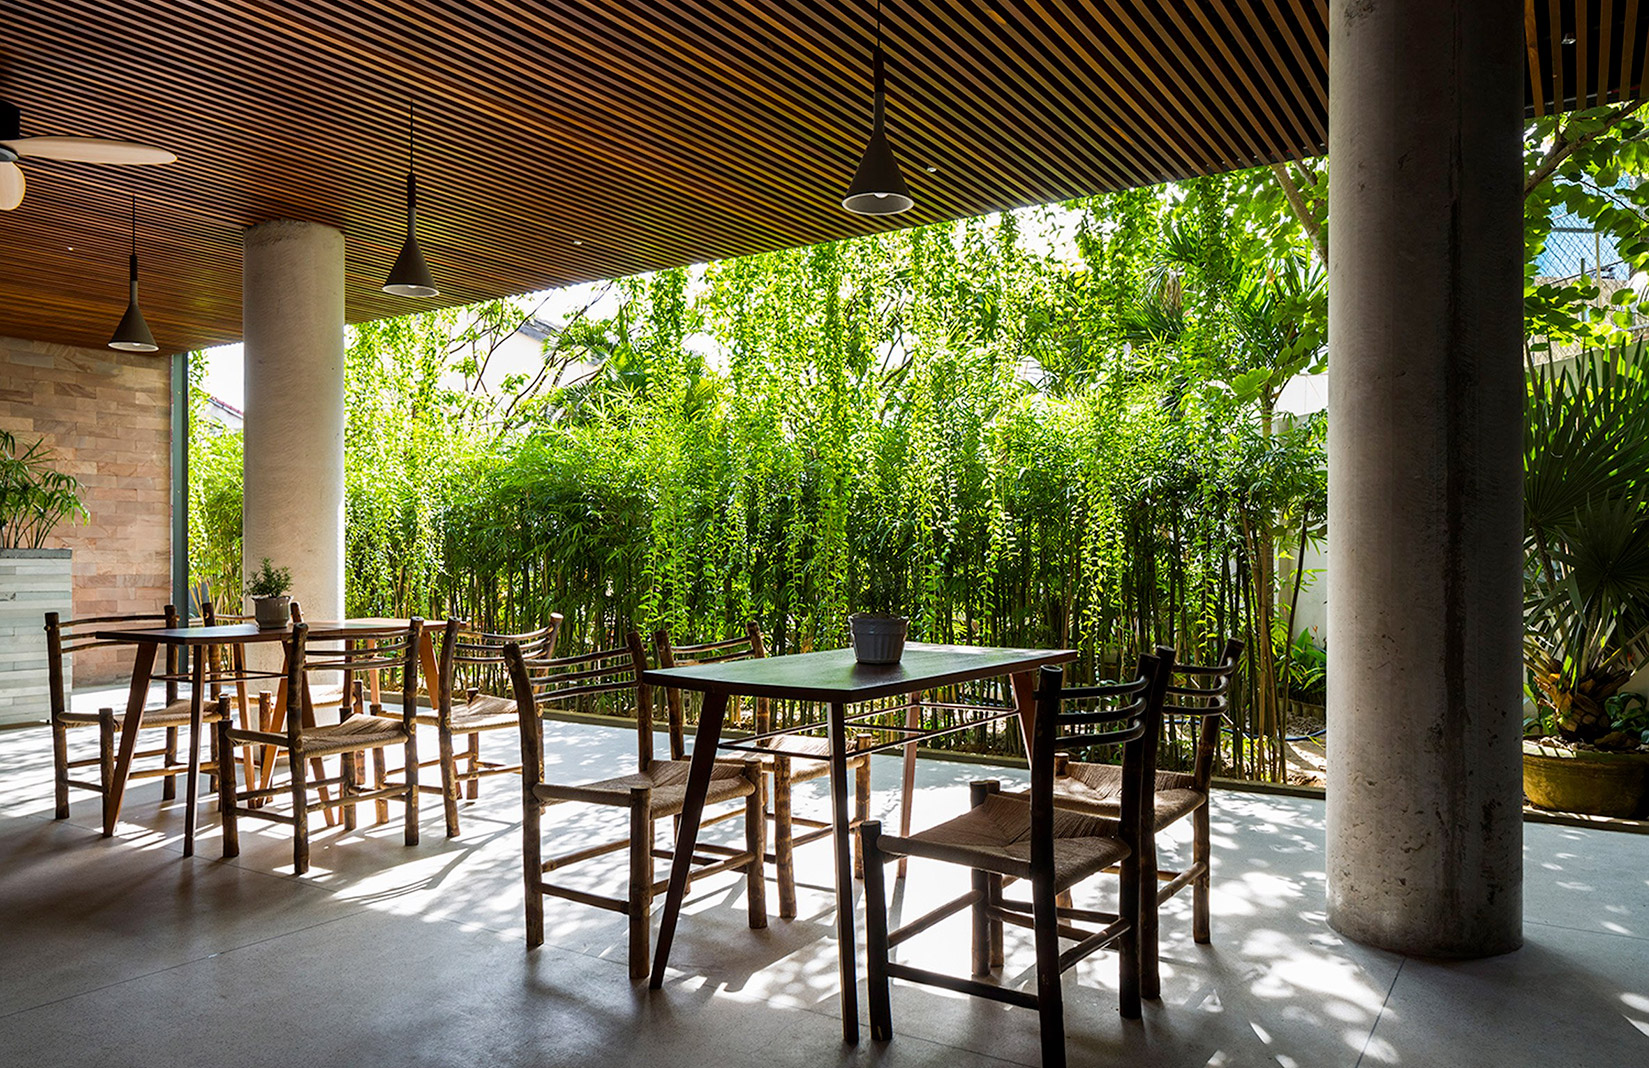 How Vietnam's architects are embracing biophilia